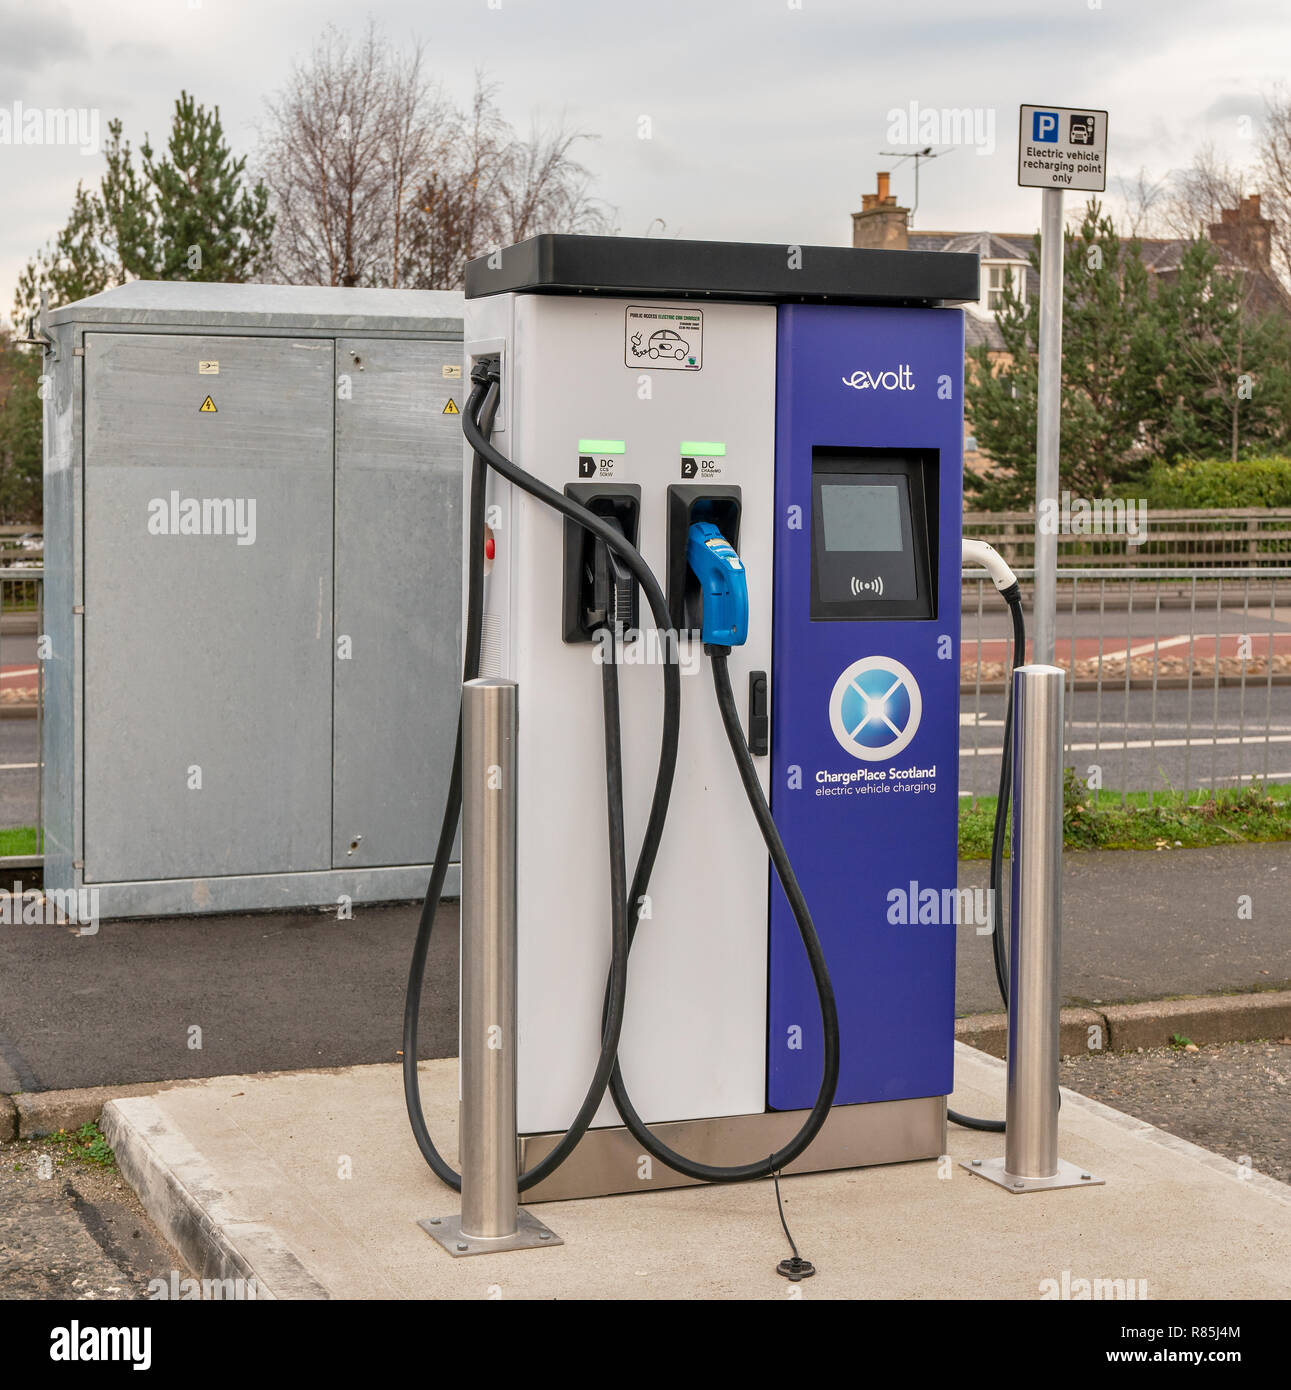 This a vehicle being charged at a Car Park in Elgin, Moray, Scotland run by ChargePlace Scotland - https://chargeplacescotland.org/. Photographed by J Stock Photo